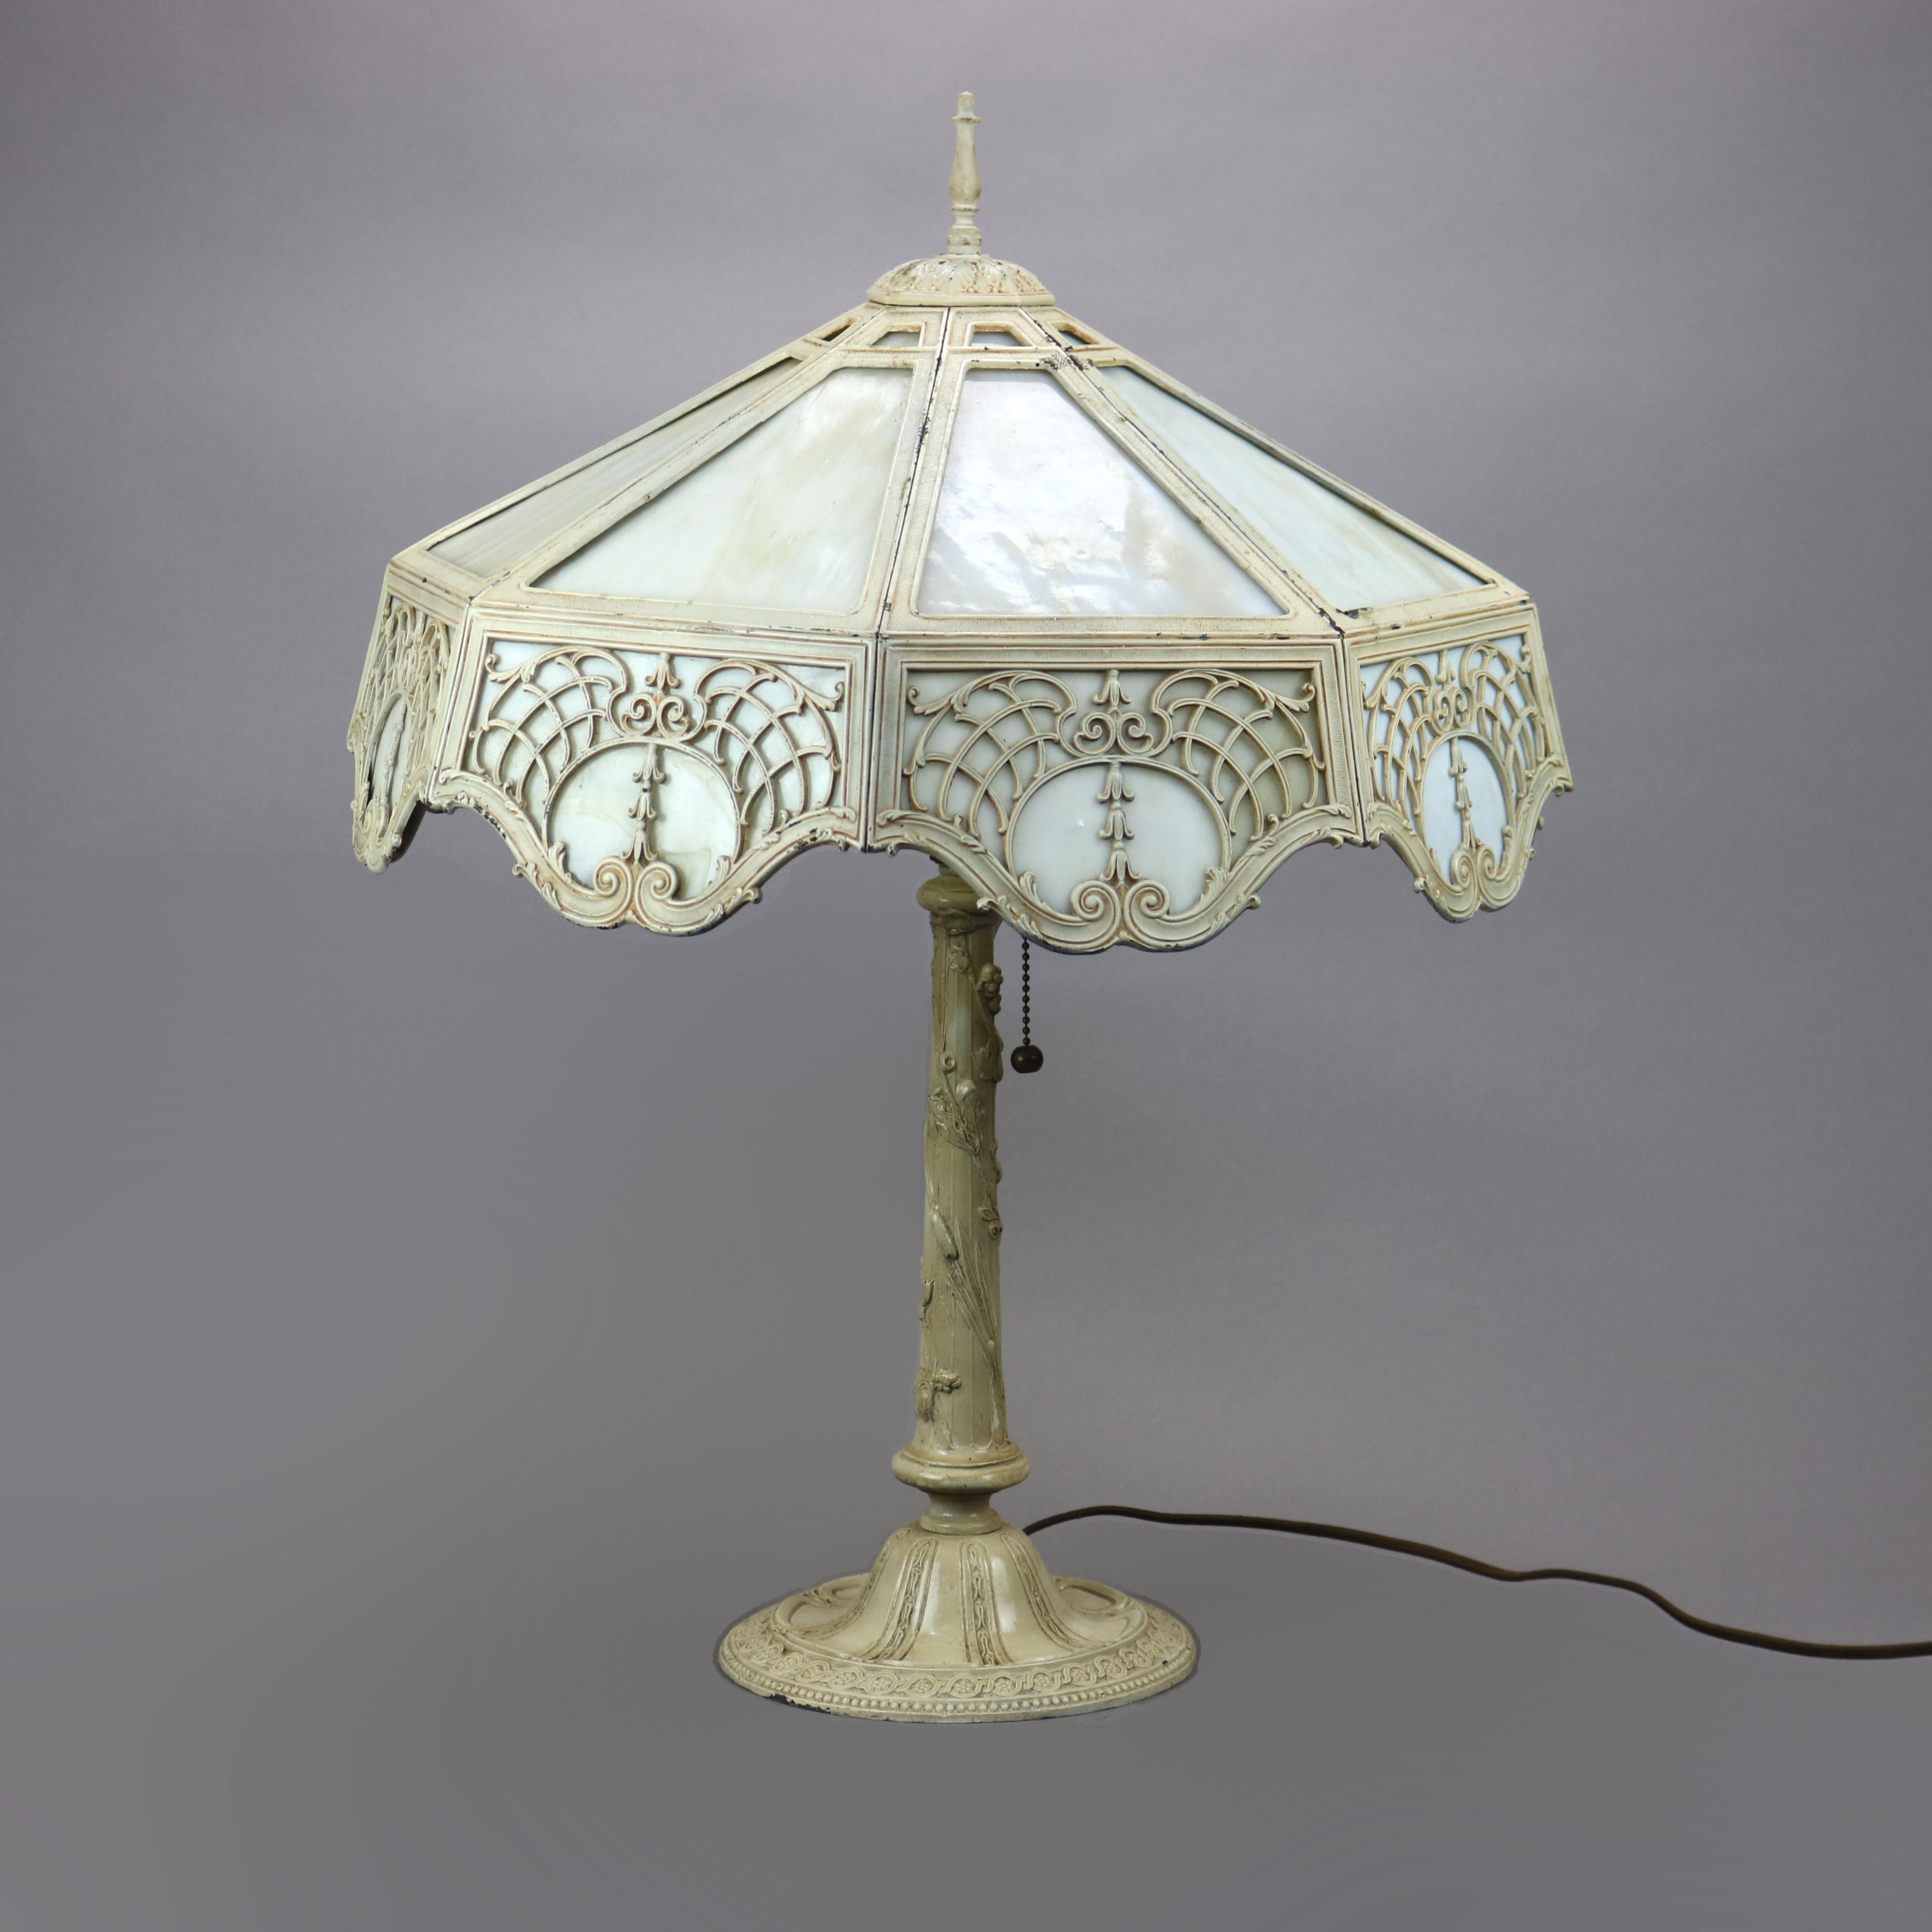 An antique Arts & Crafts table lamp in the manner of Bradley and Hubbard offers cast filigree shade with inverted bellflower and scrolled foliate elements housing slag glass panels over single socket base having foliate elements, c1920

Measures -